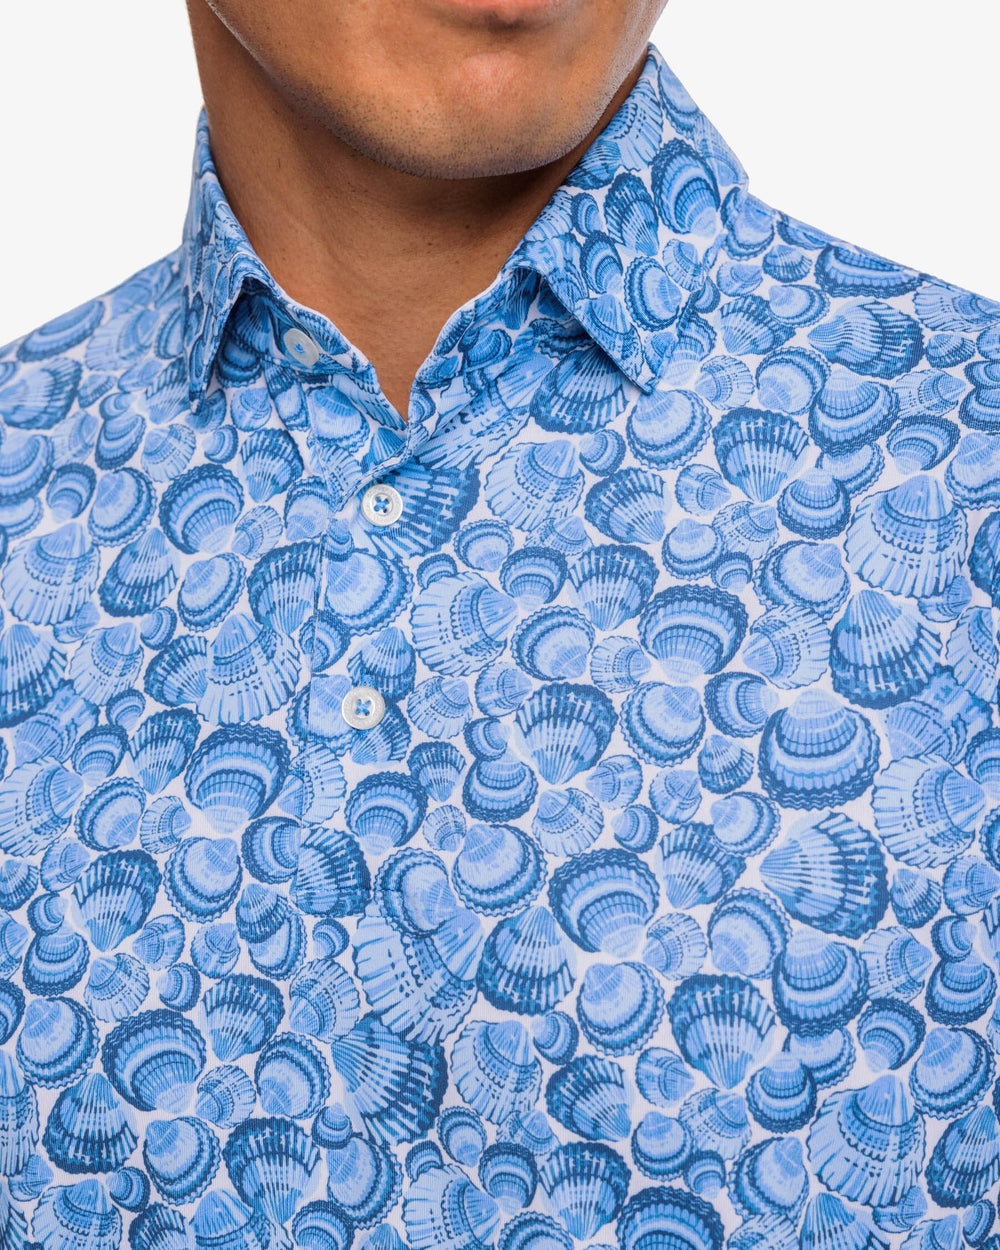 The detail view of the Southern Tide Driver Sunday Shellies Performance Polo Shirt by Southern Tide - Classic White